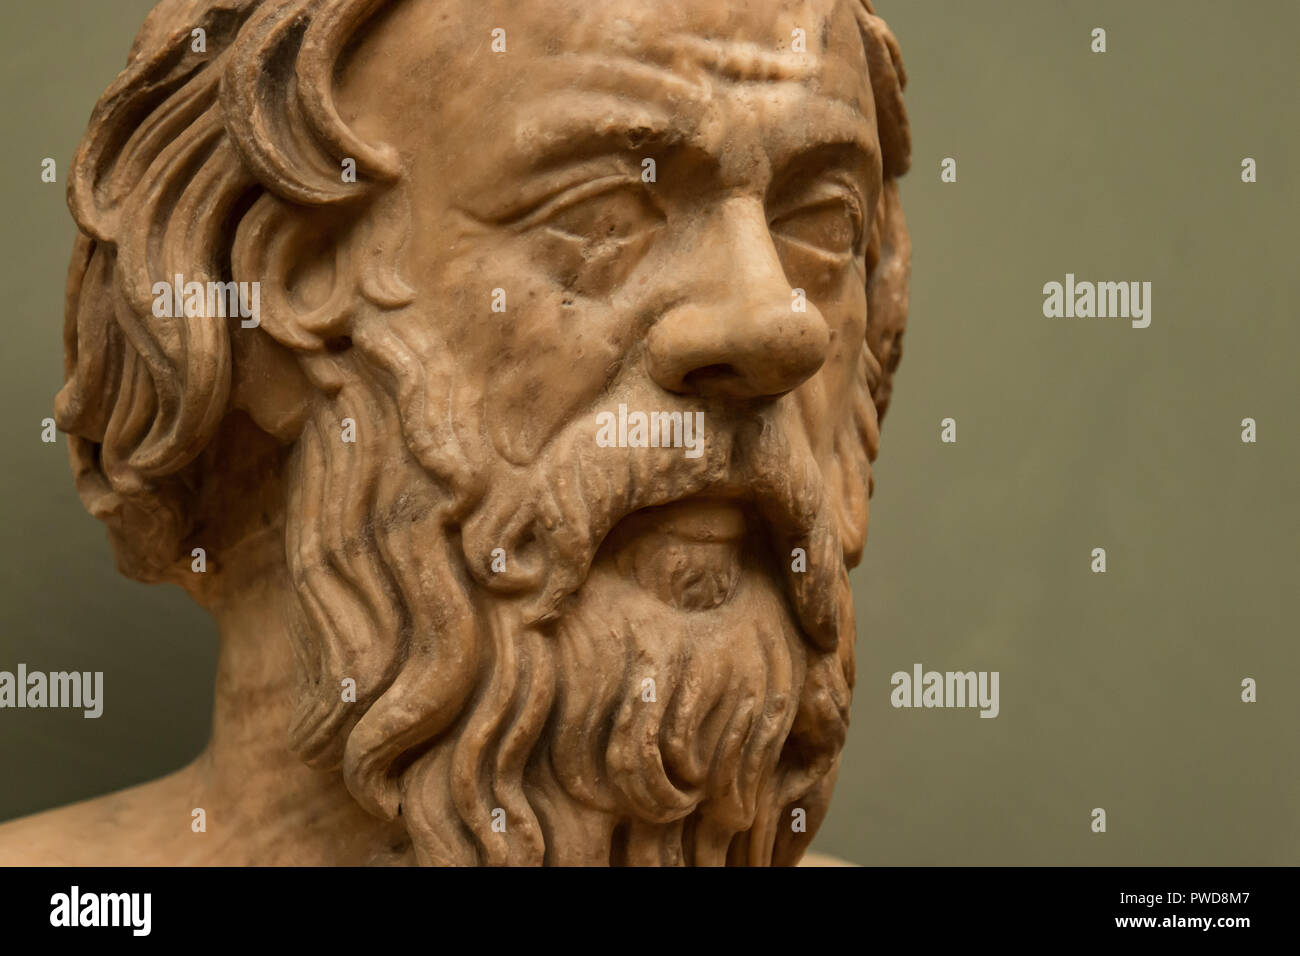 Portrait of a man on a herm known as Socrates is a bust on display in the Uffizi Gallery in Florence, Italy. Stock Photo